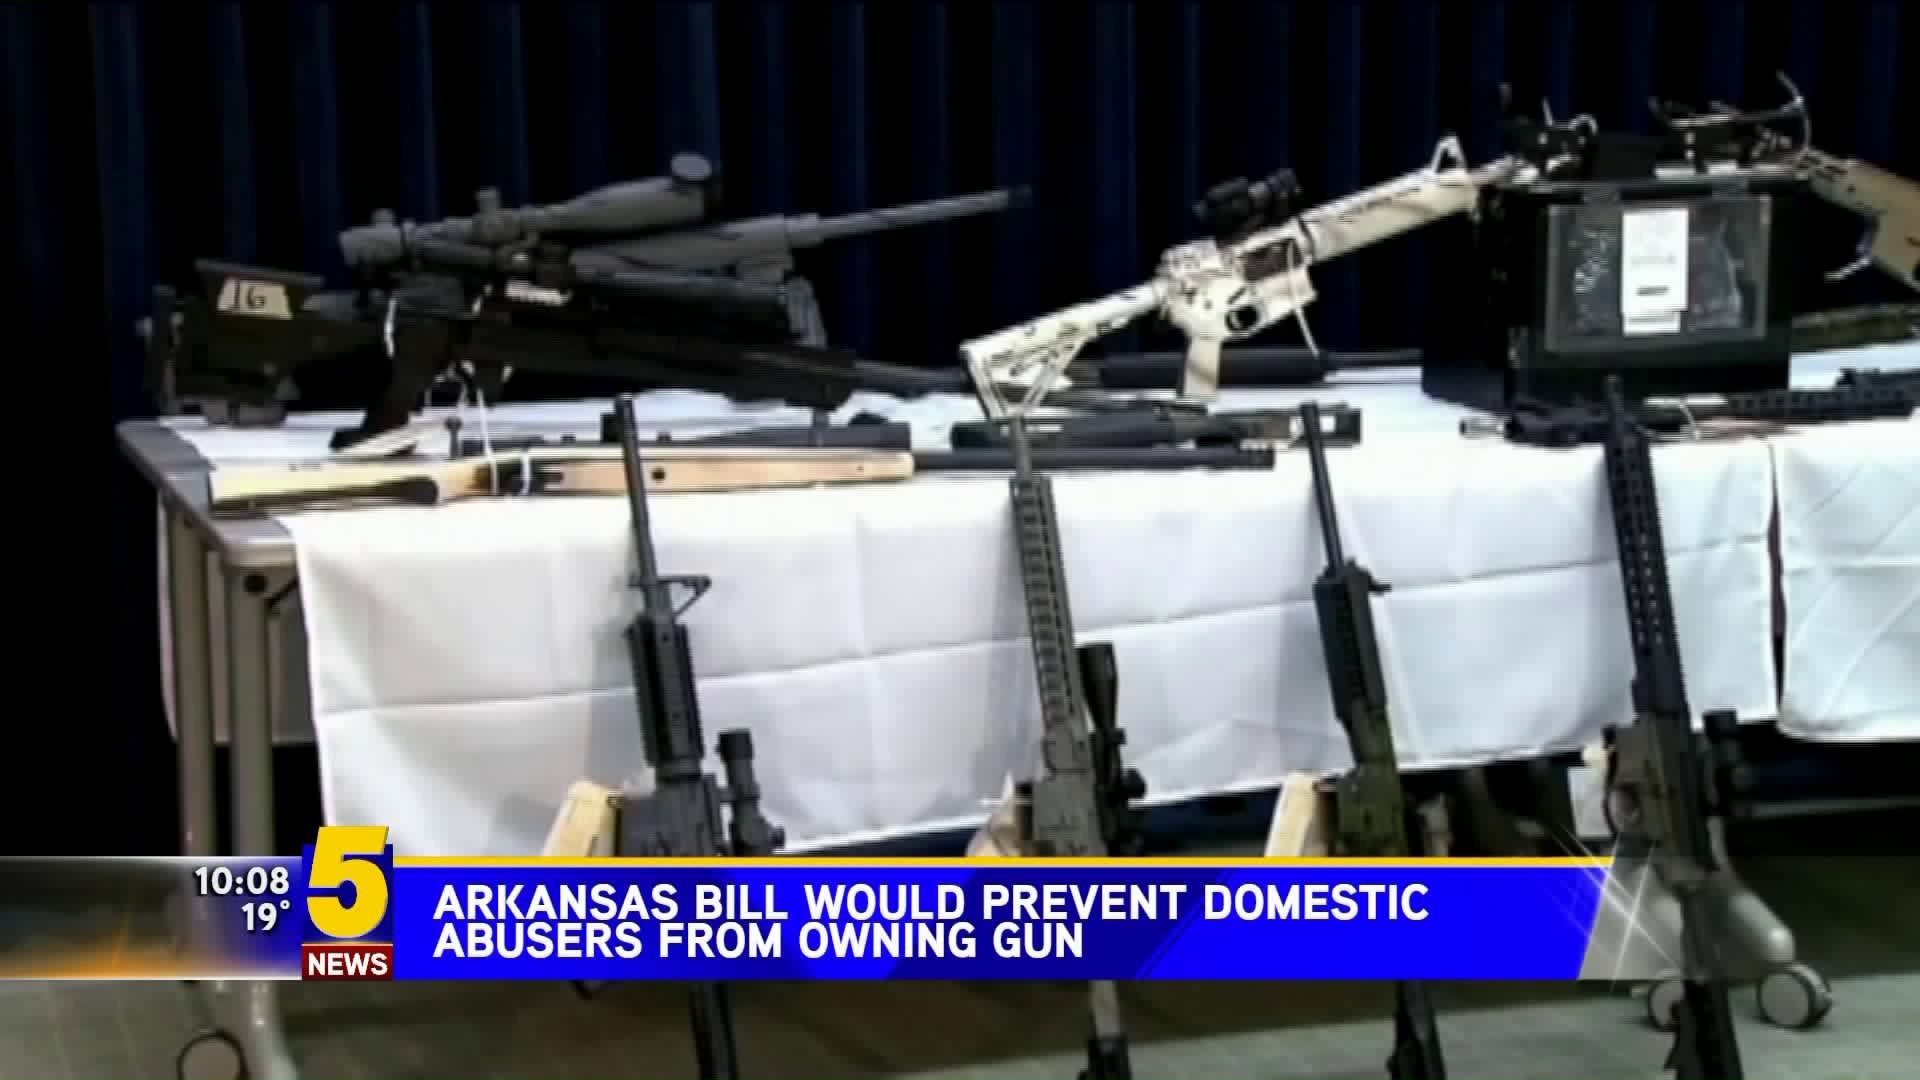 Arkansas Bill Would Prevent Domestic Abusers From Owning Gun